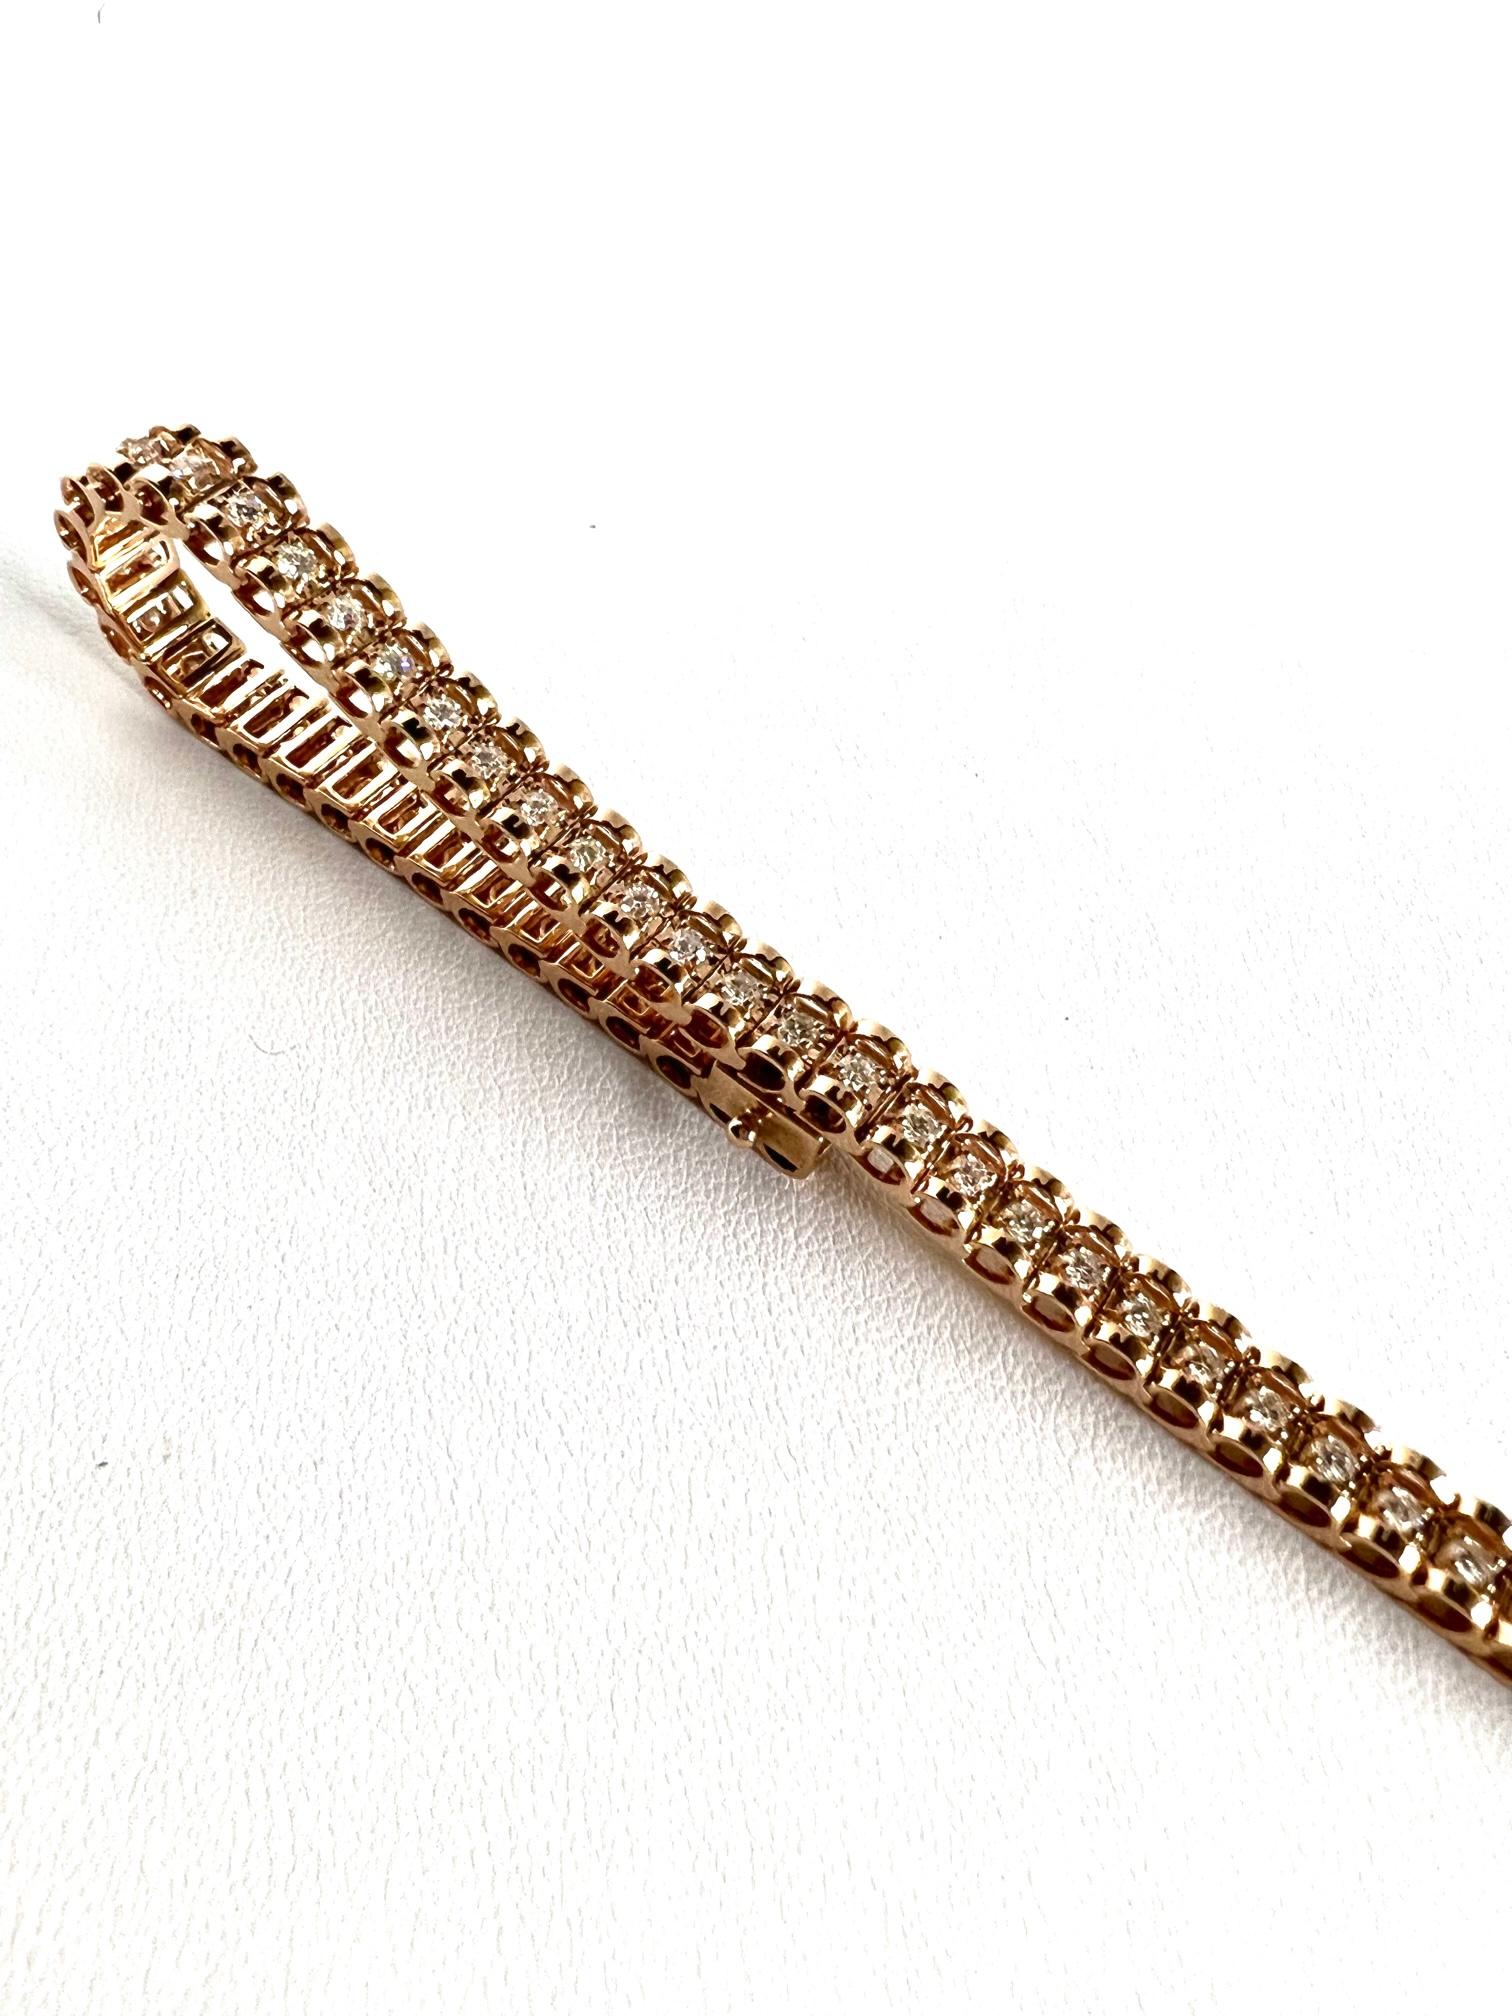 Thomas Leyser is renowned for his contemporary jewellery designs utilizing fine gemstones.

1 flexible bracelet in 14k red gold with 52 diamonds round H/SI, 2,10cts.. Length 19cm. Width 6mm.